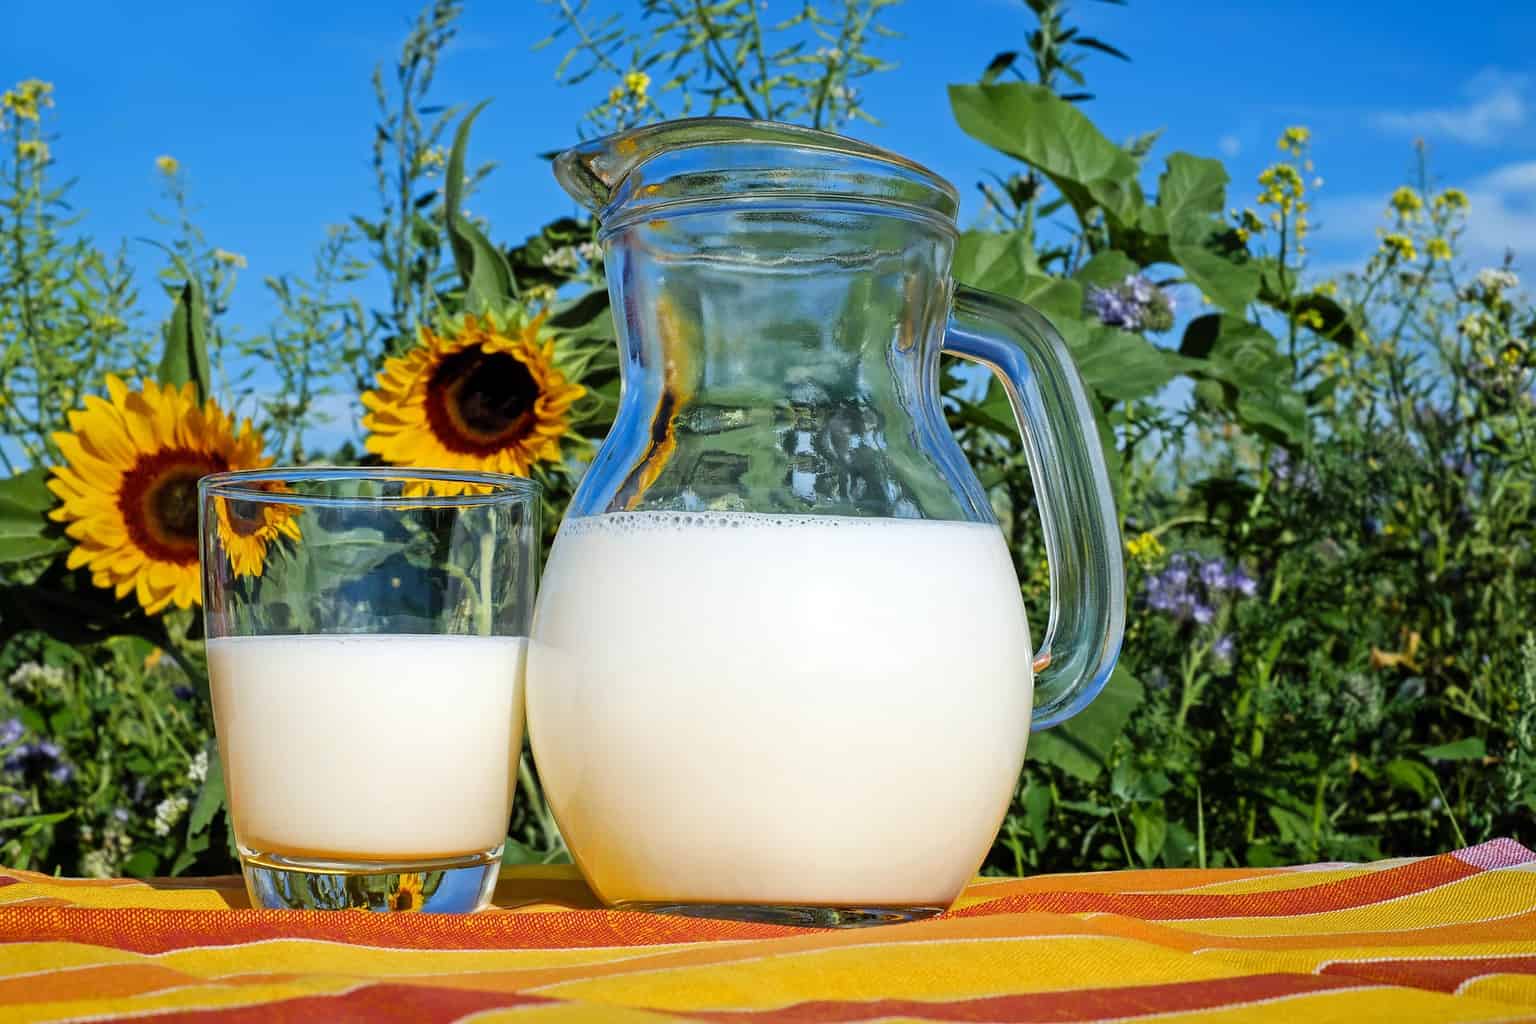 There are a jug of milk and a cup of milk with a garden scenery